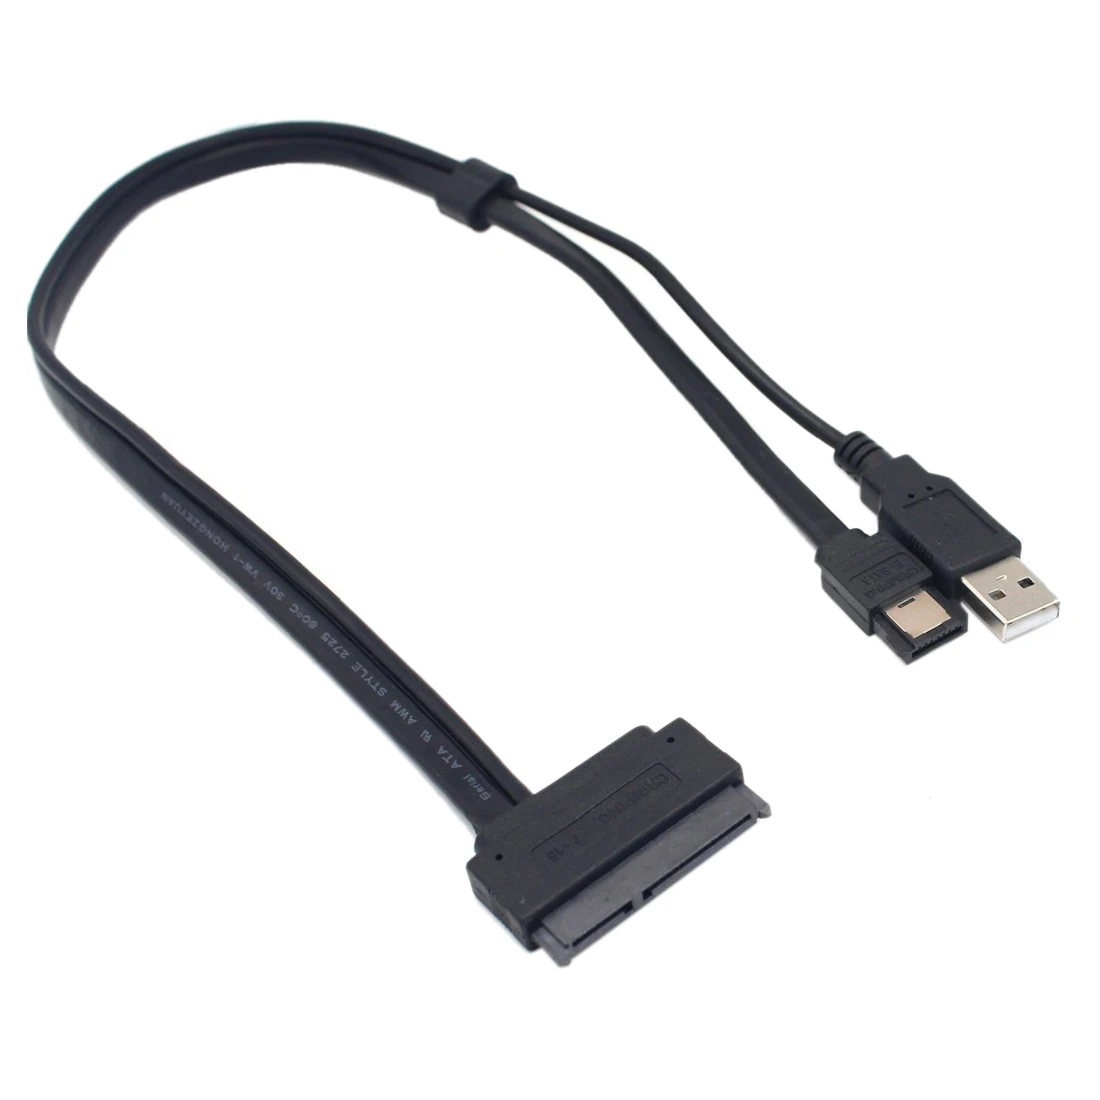 

2.5 inch Hard Disk Drive SATA 22Pin to eSATA Data USB Powered Cable Adapter for Optimized For SSD, Support UASP SATA III\EC-SSHD